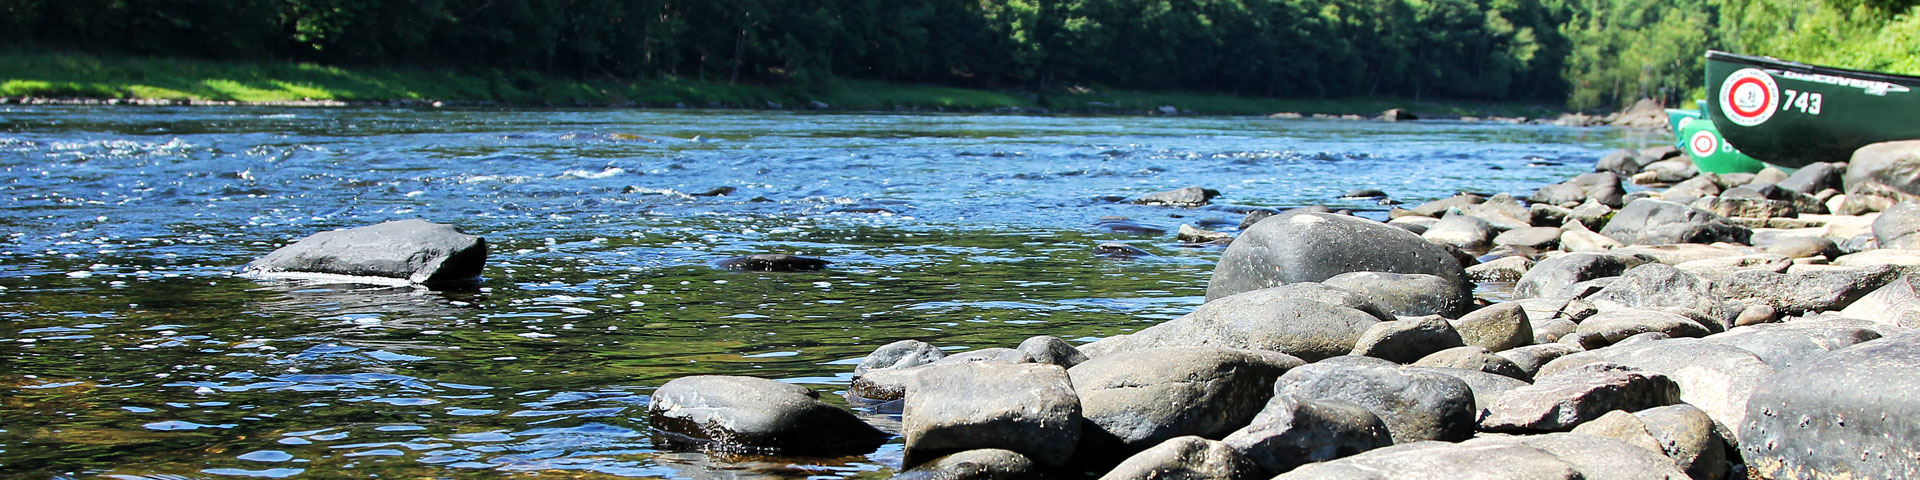 What To Bring on Your Delaware River Tubing Adventure